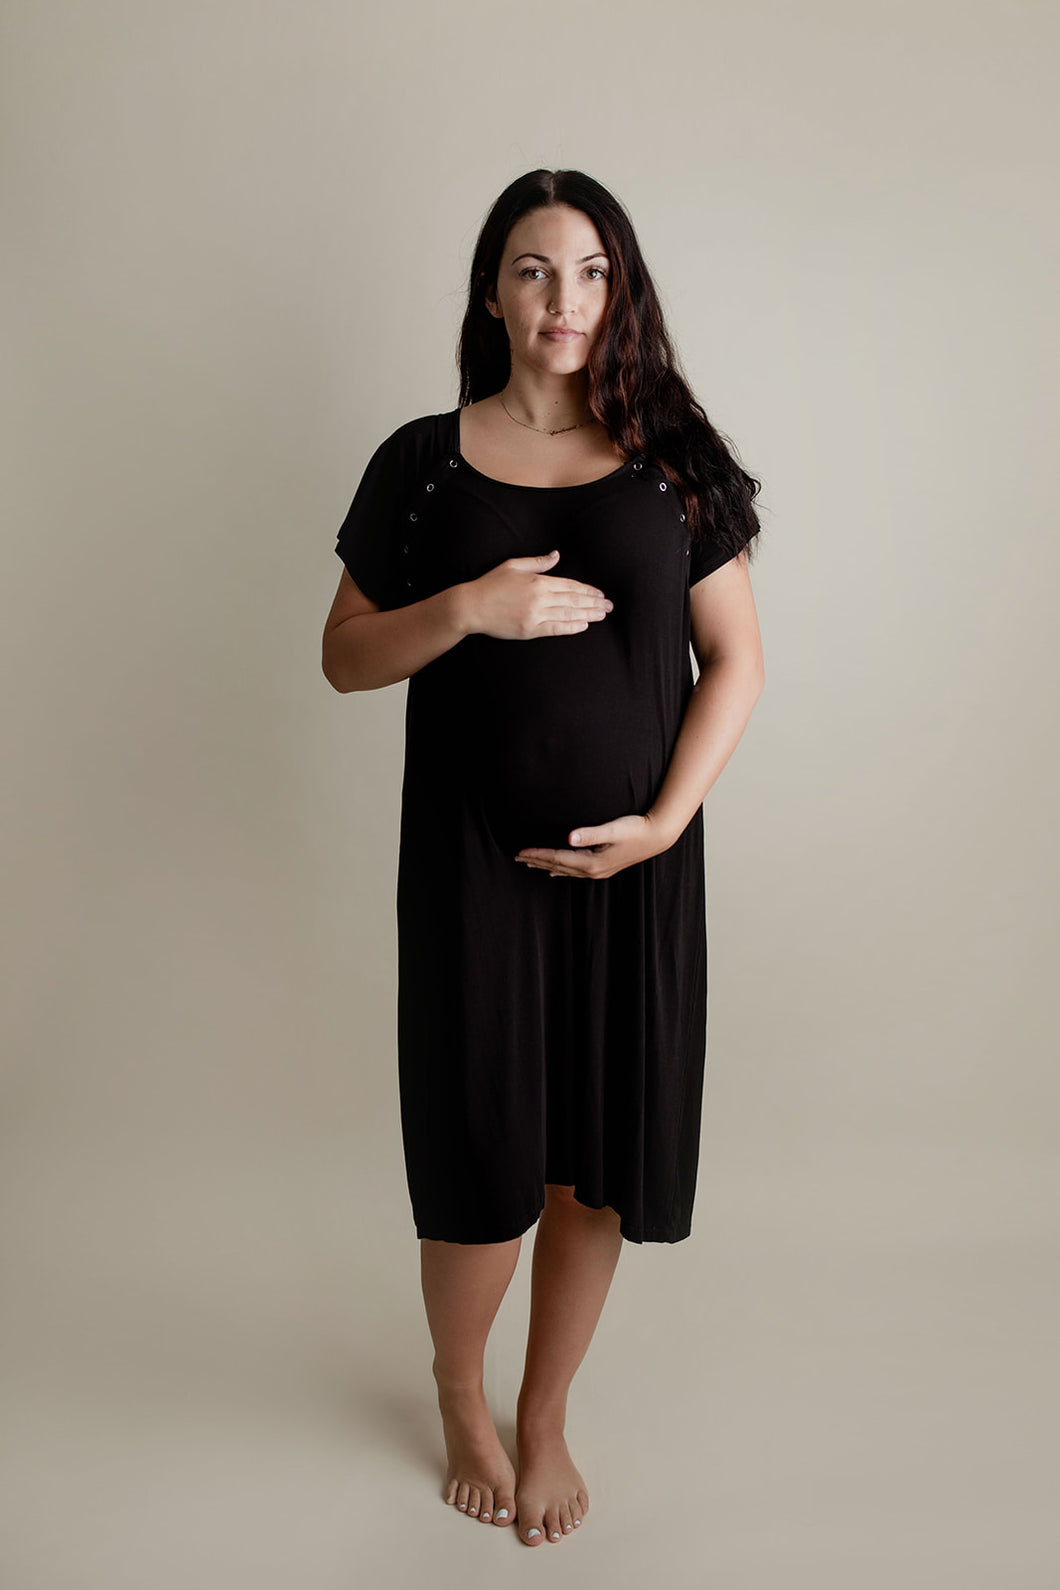 Ribbed Black Labor and Delivery/ Nursing Gown